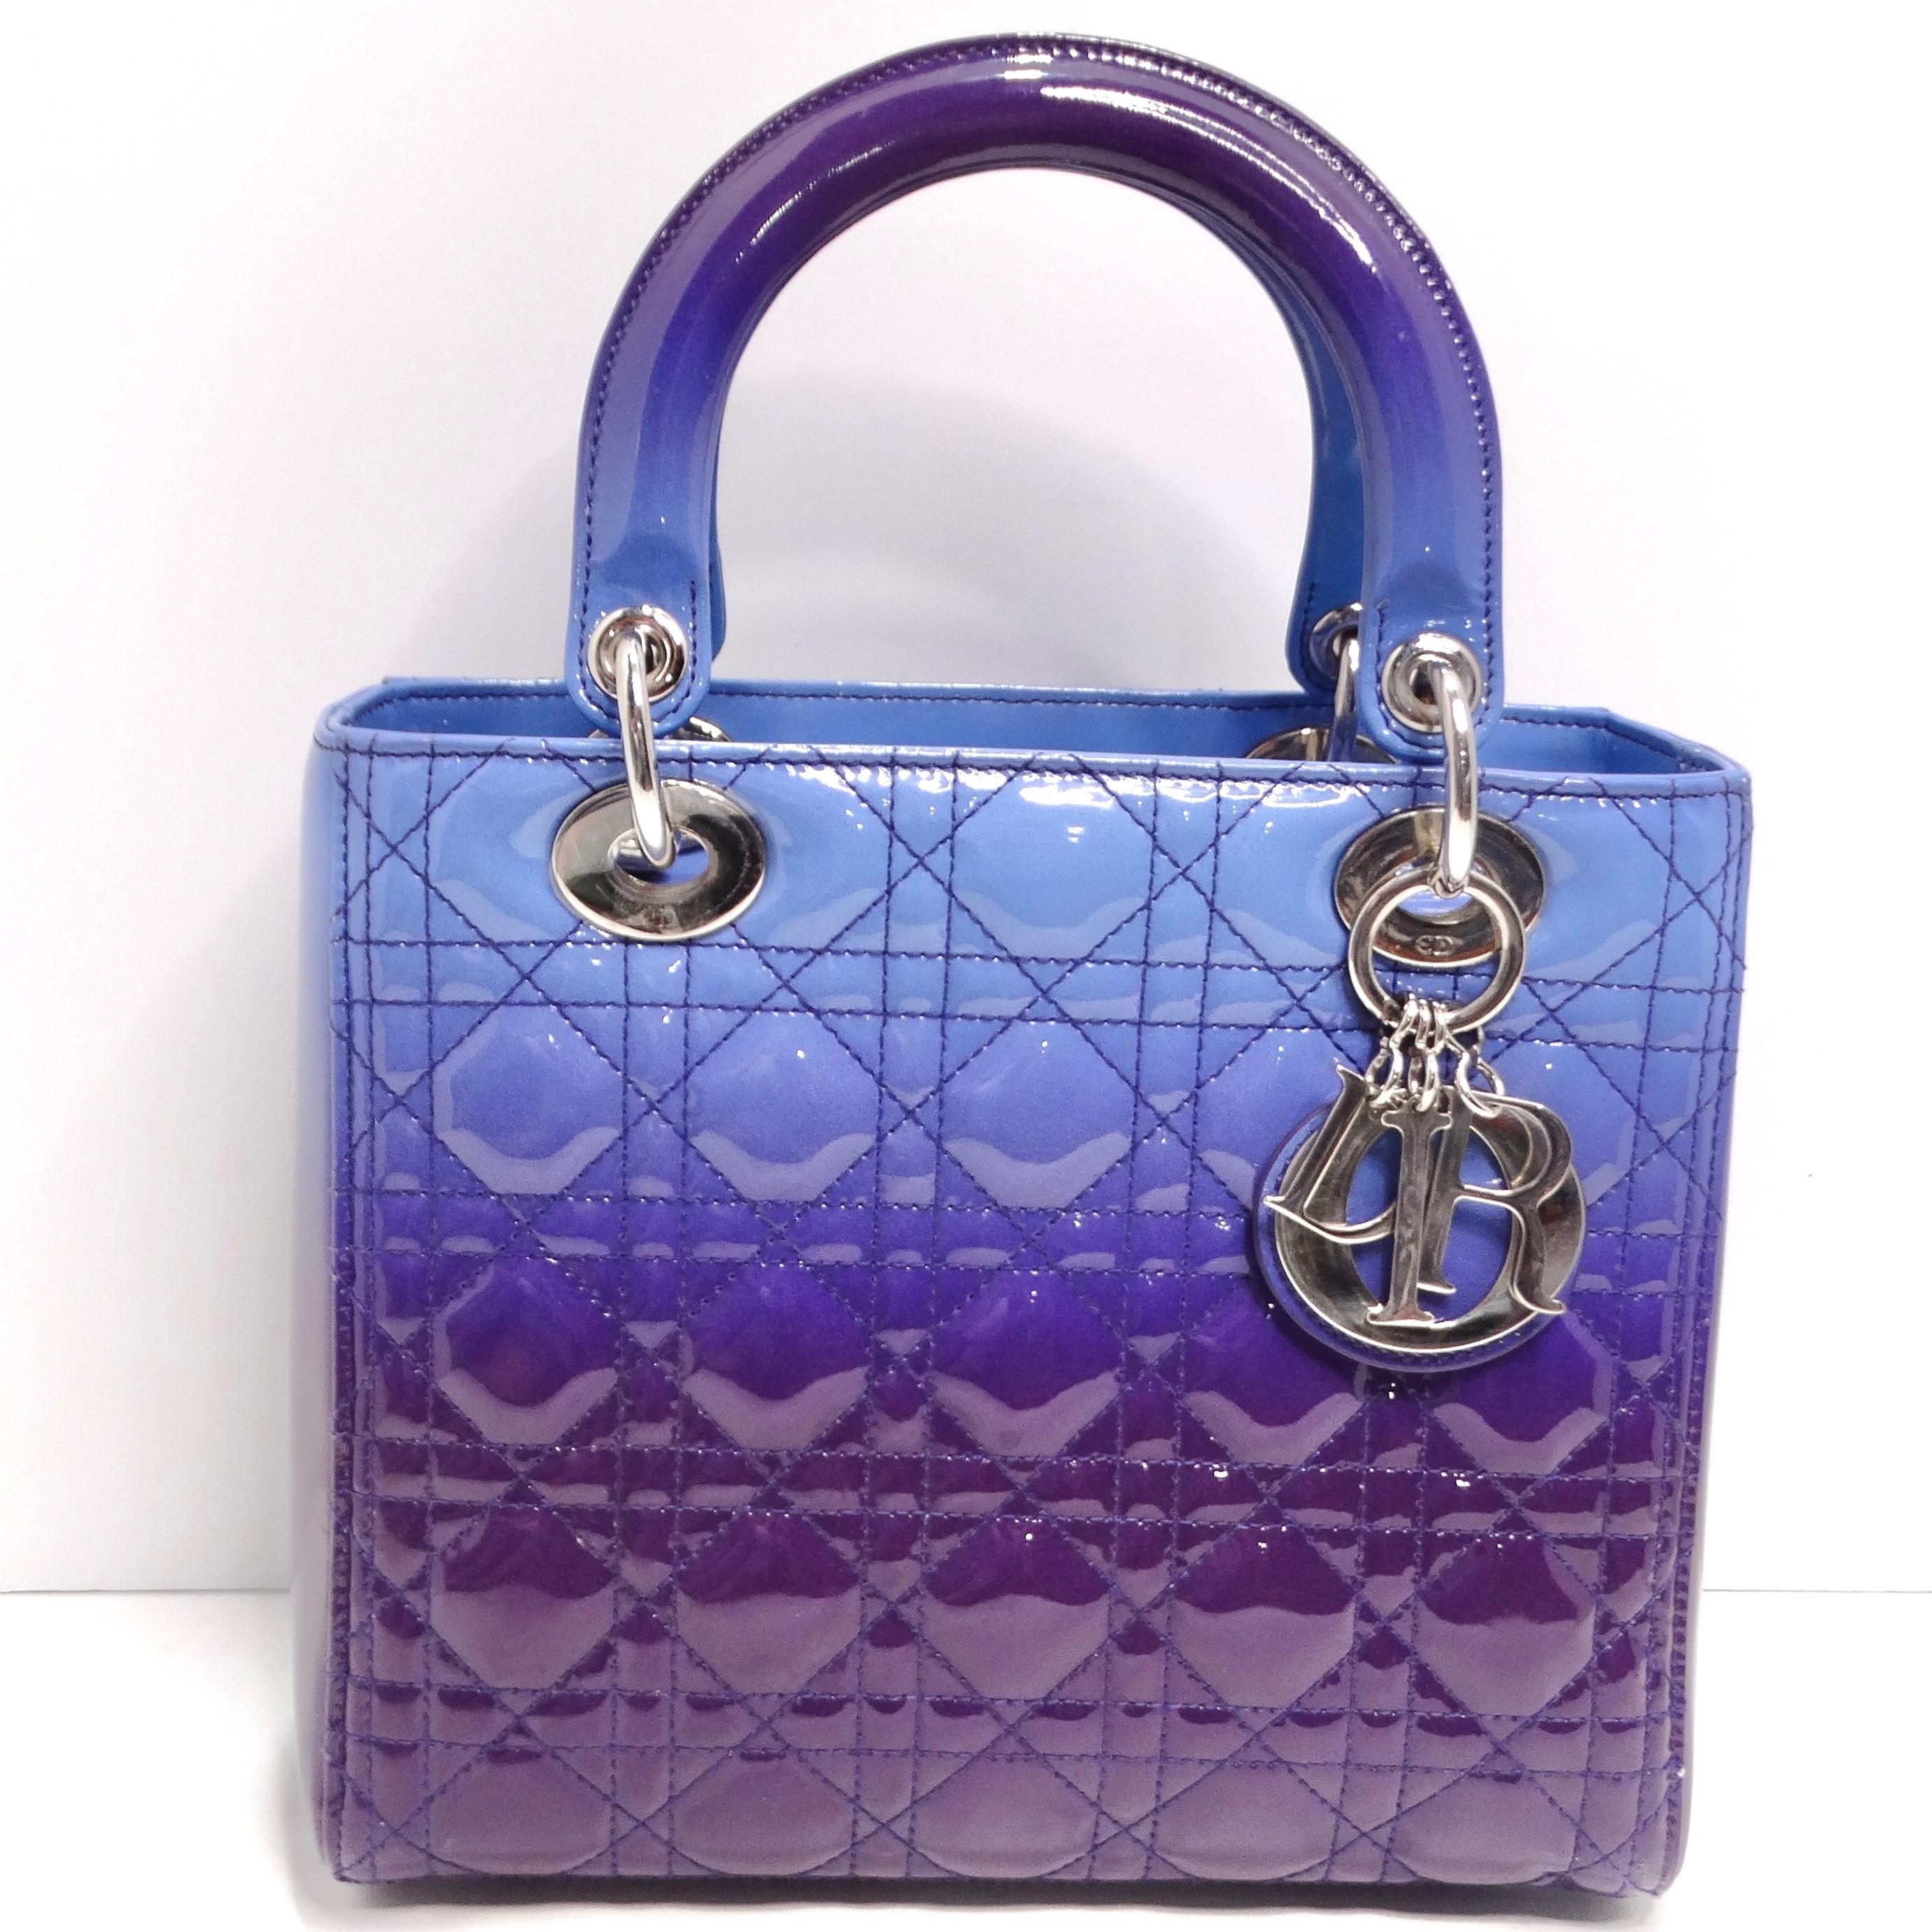 Introducing a work of art in the form of a handbag - the Christian Dior Patent Cannage Gradient Medium Lady Dior Bag. Crafted with exquisite attention to detail, this bag is a true masterpiece of luxury fashion, designed to make a vibrant and